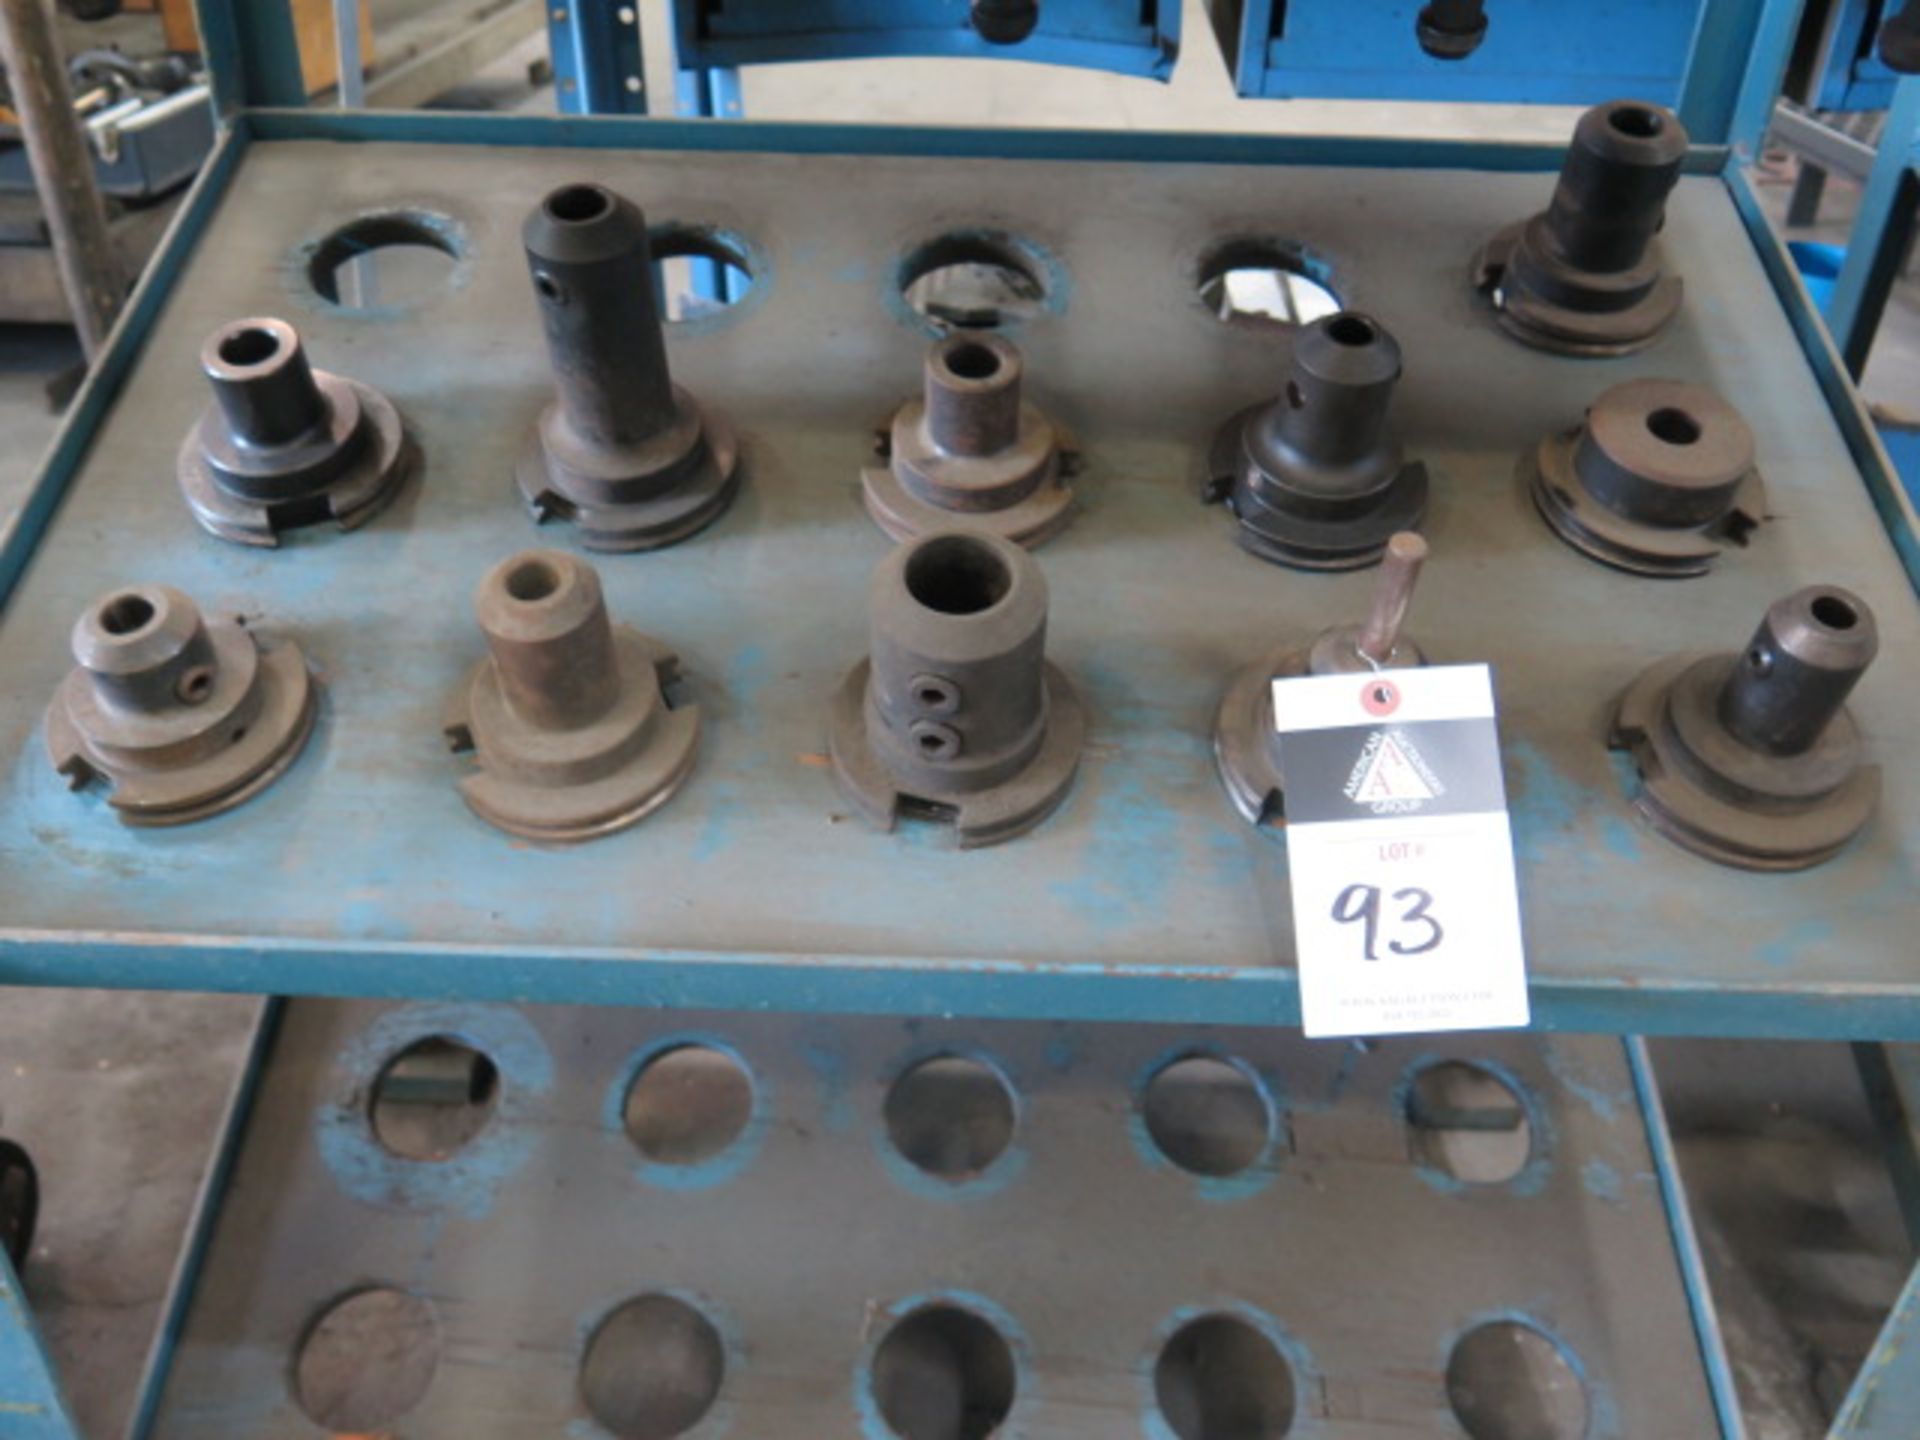 CAT-50 Taper Tooling (11) w/ Rack (SOLD AS-IS - NO WARRANTY)